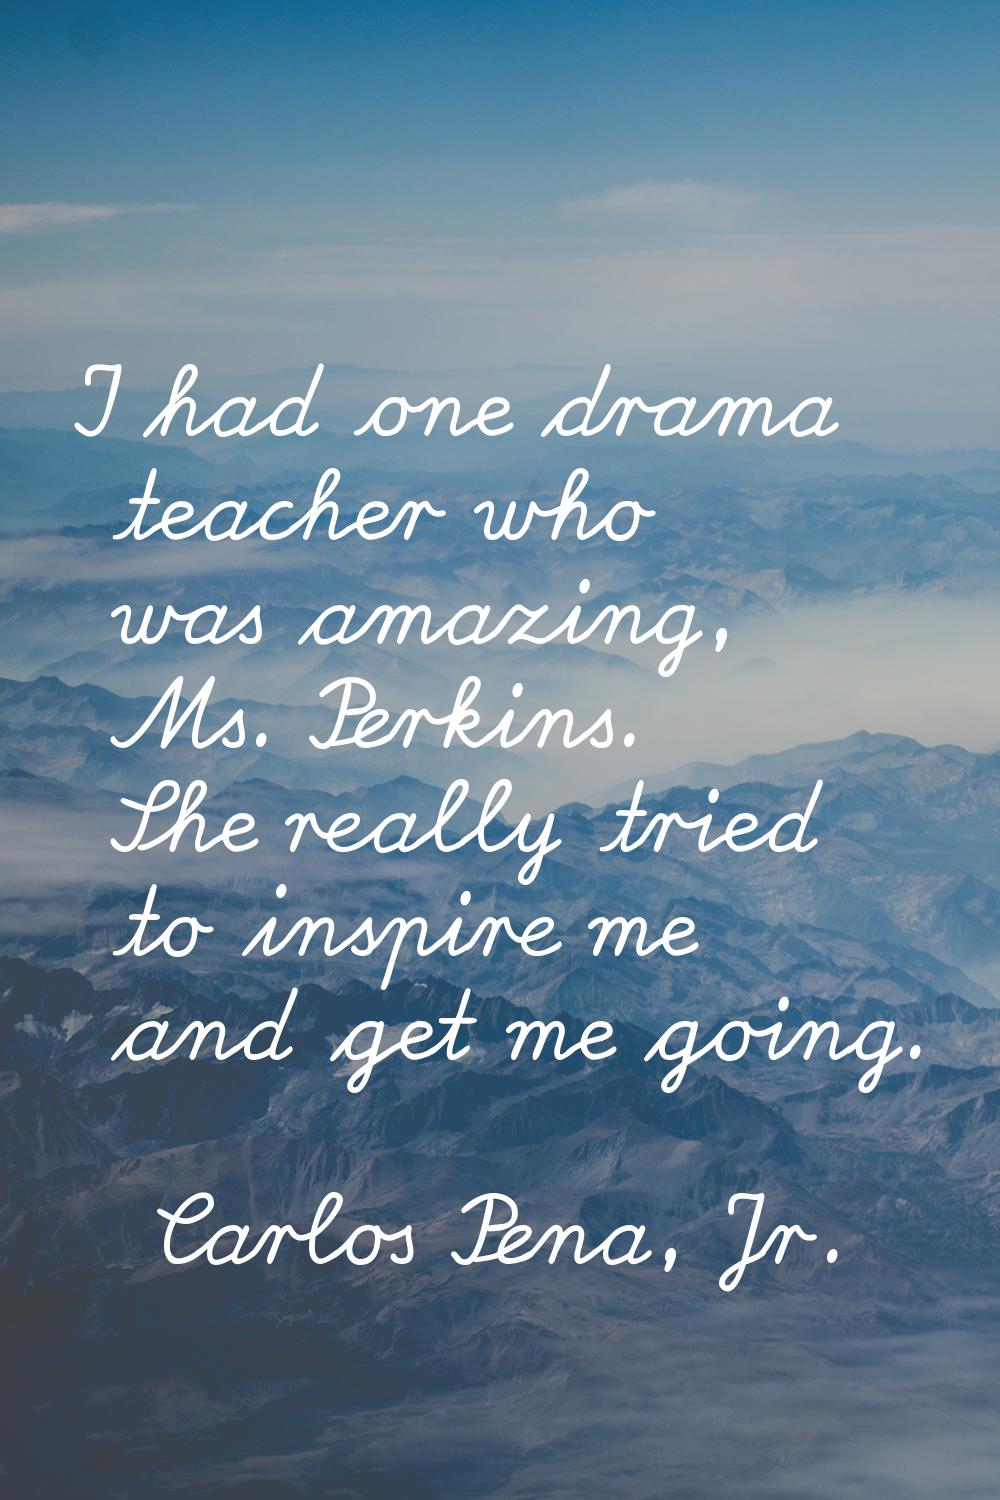 I had one drama teacher who was amazing, Ms. Perkins. She really tried to inspire me and get me goi